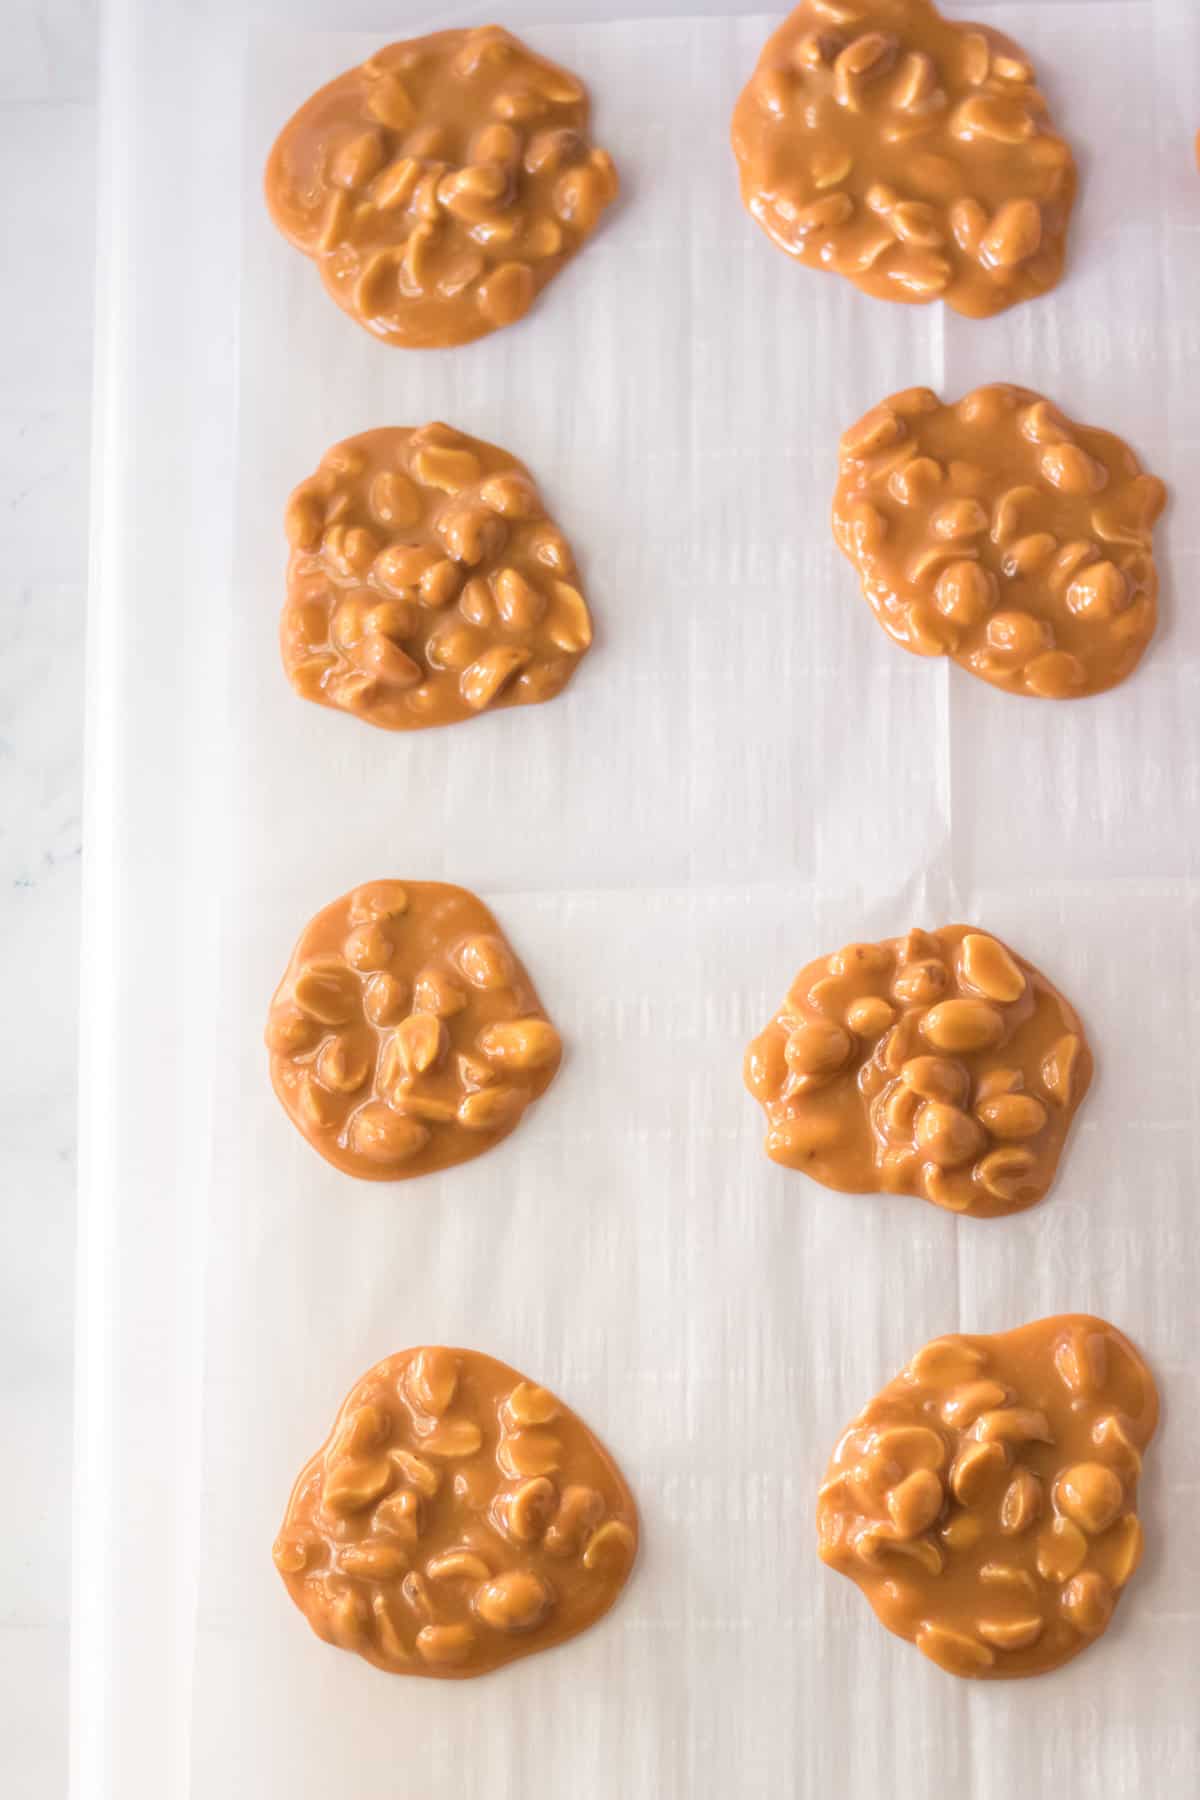 Peanut and caramel clusters on parchment paper.